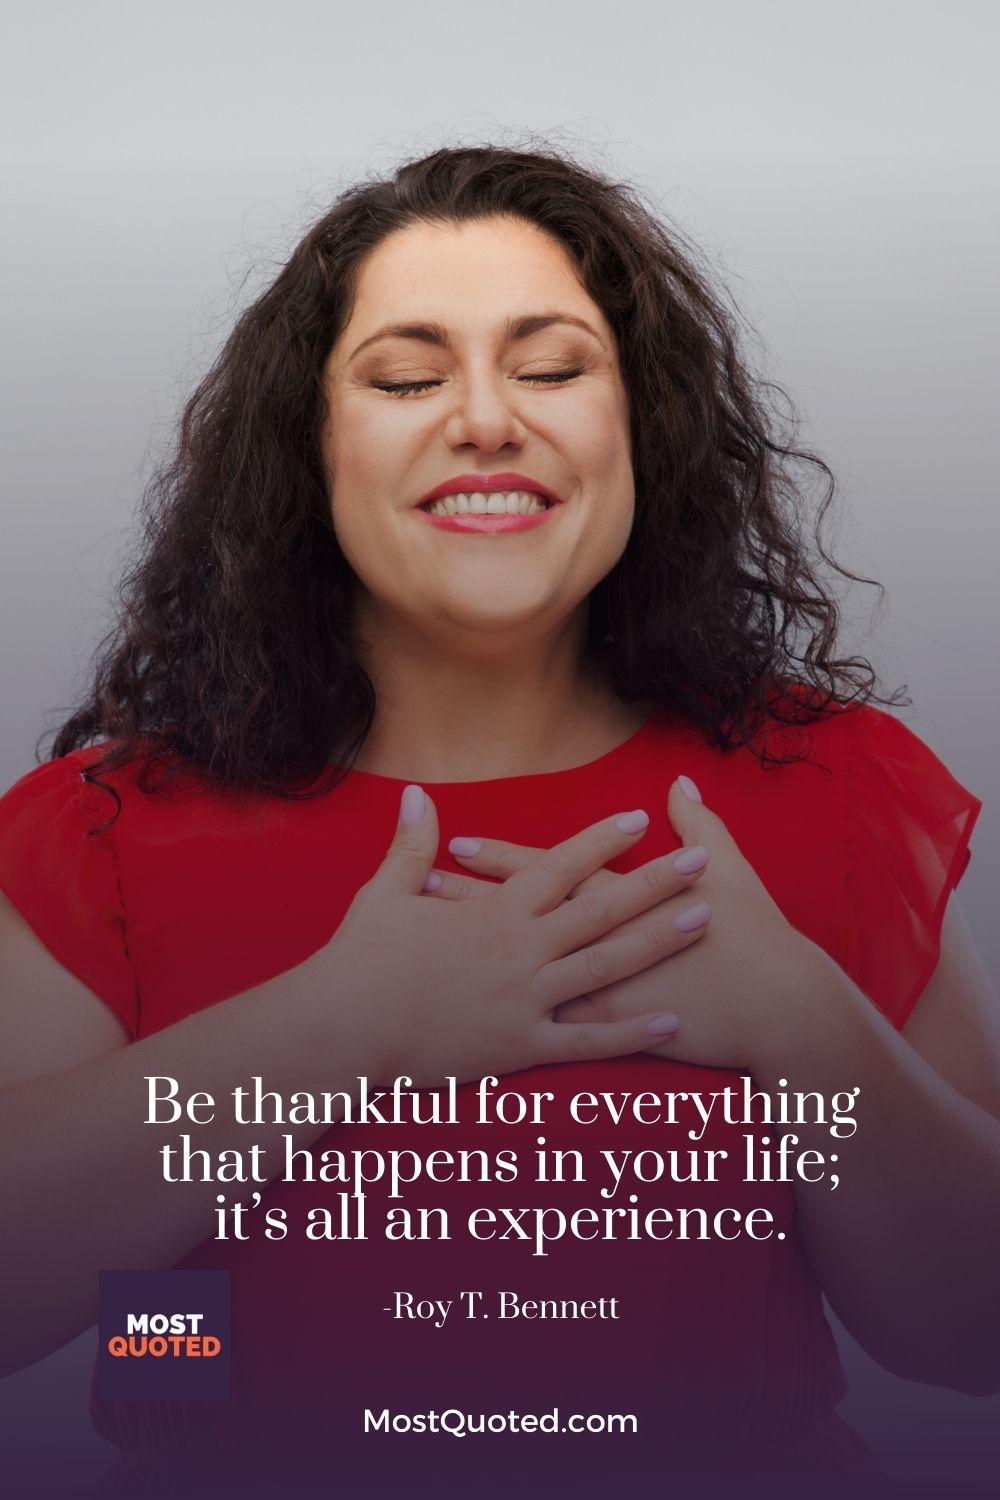 Be thankful for everything that happens in your life; it’s all an experience. - Roy T. Bennett